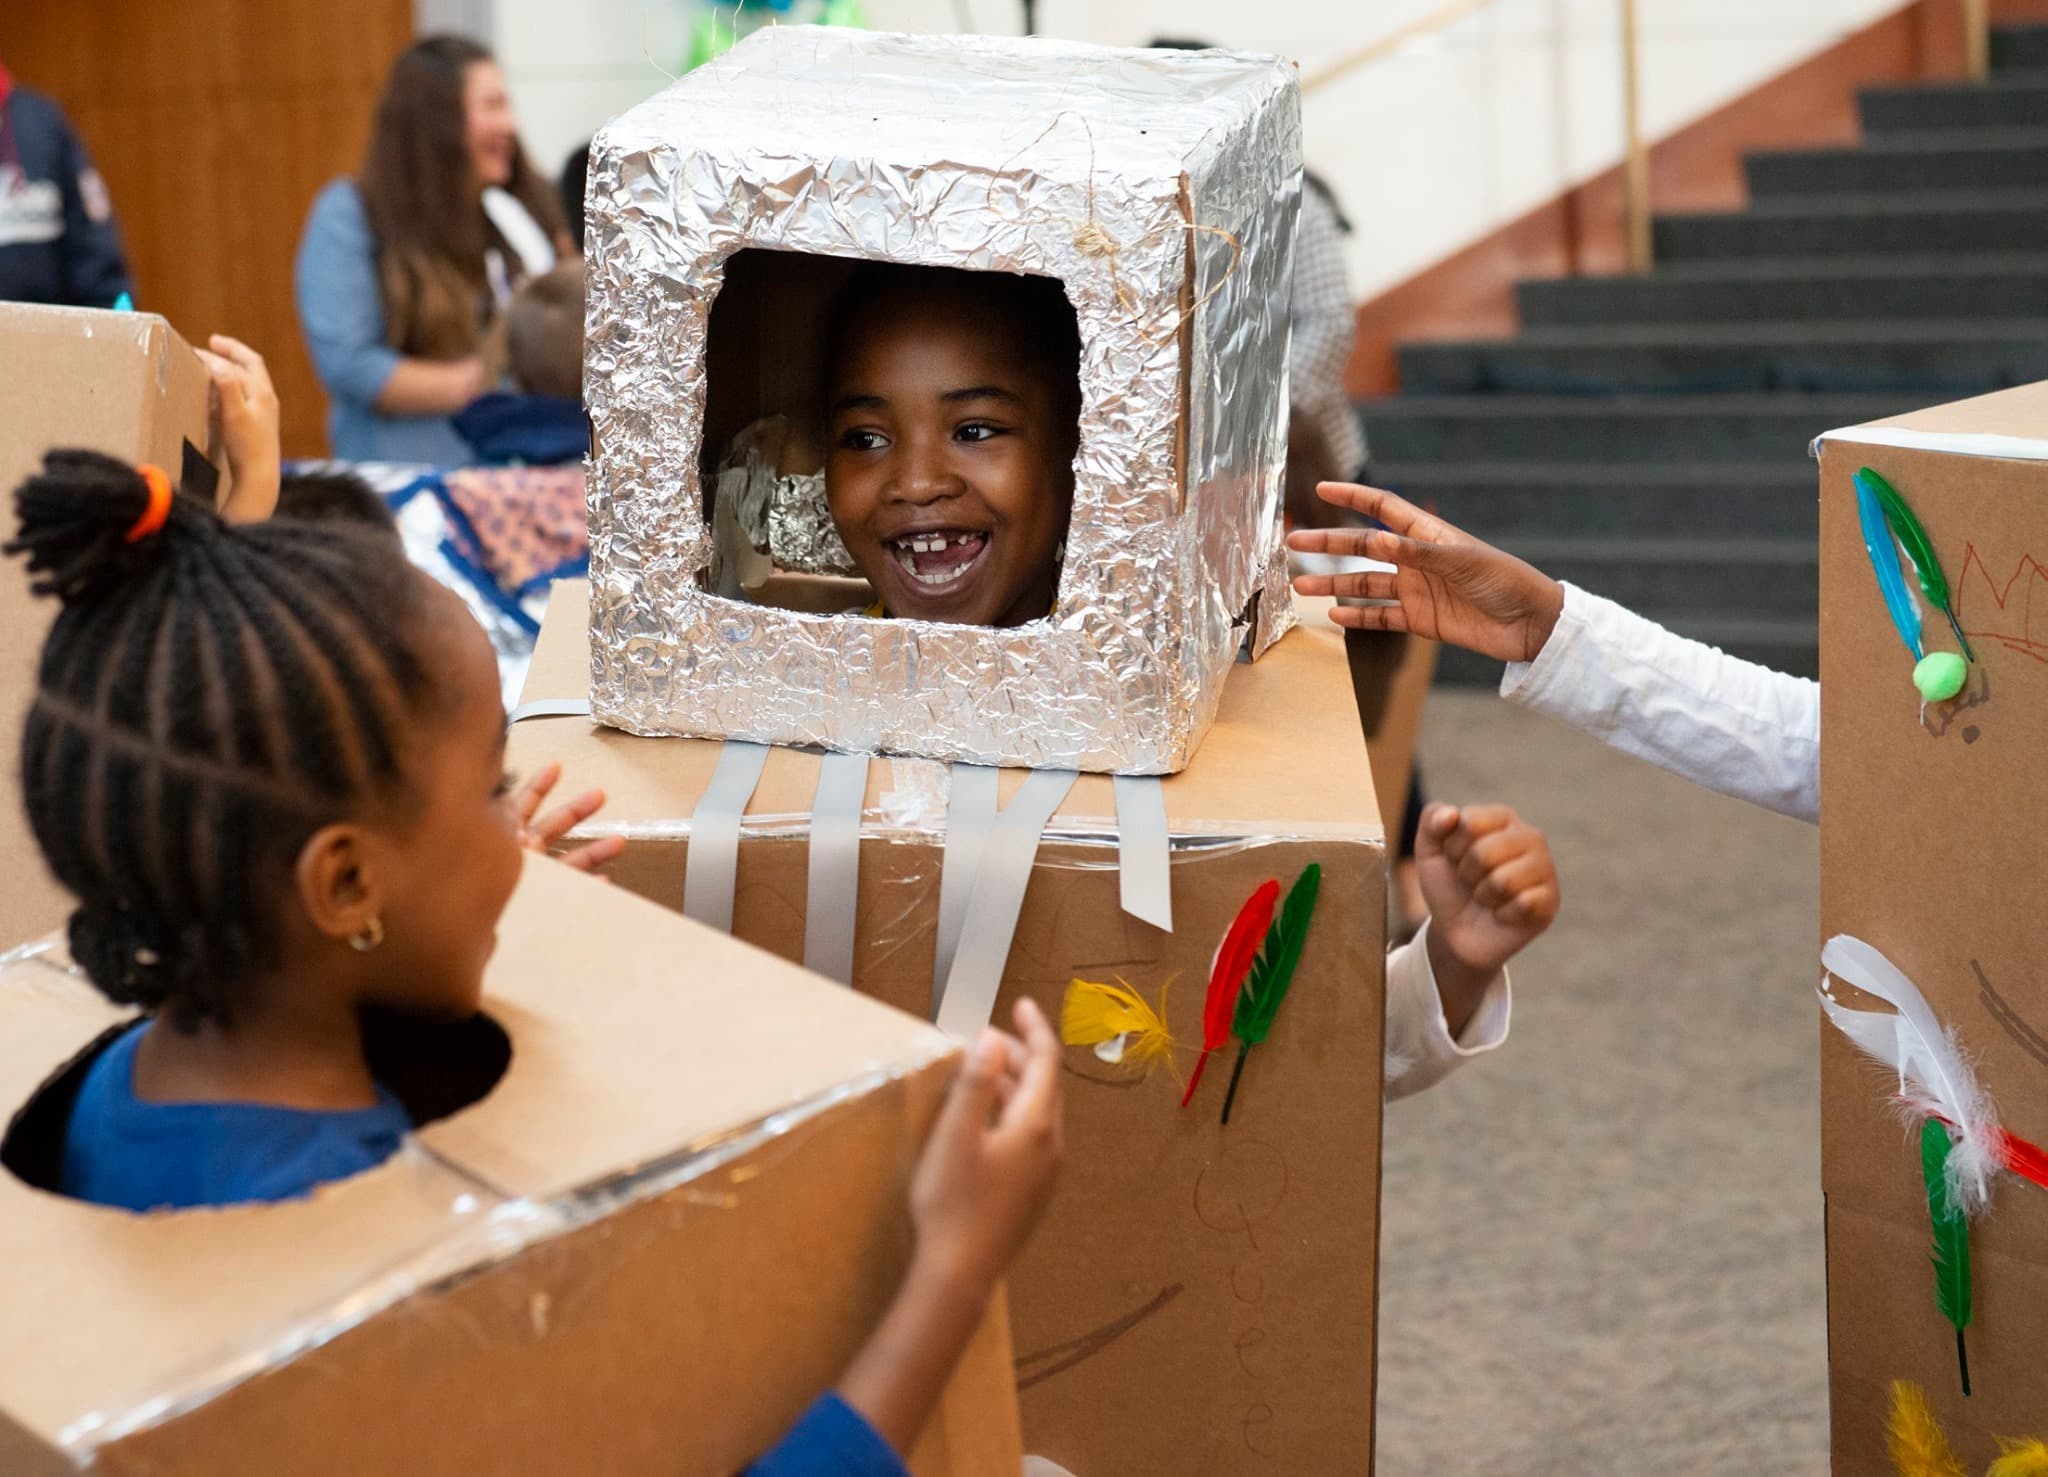 A group of young people smile and laugh together while sporting cardboard boxes around their torsos and head covered in tape tinfoil and various craft supplies as if they are robots